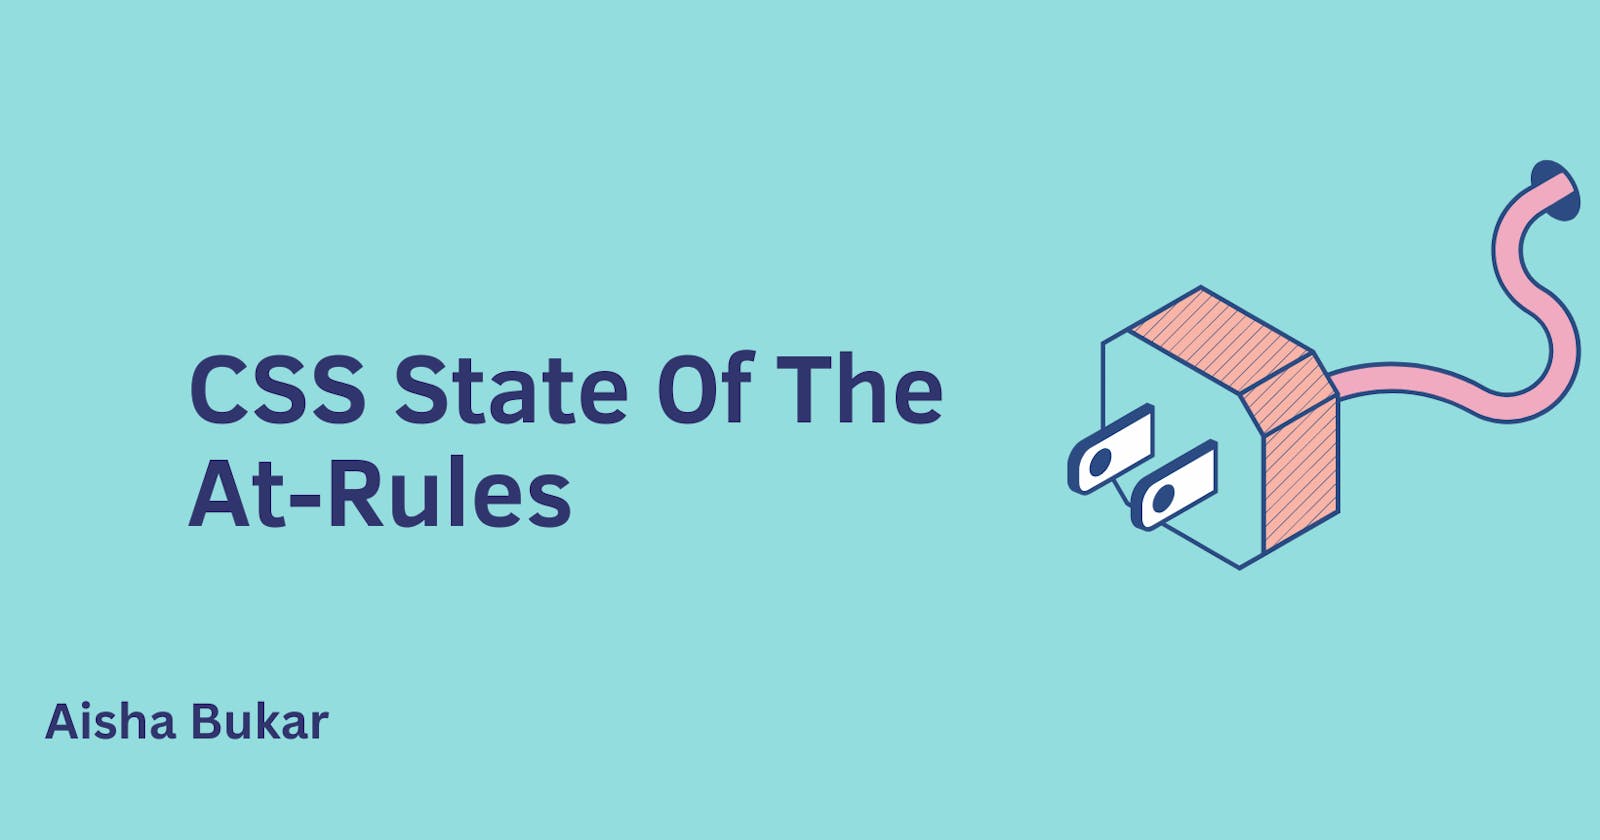 CSS State Of The At-Rules